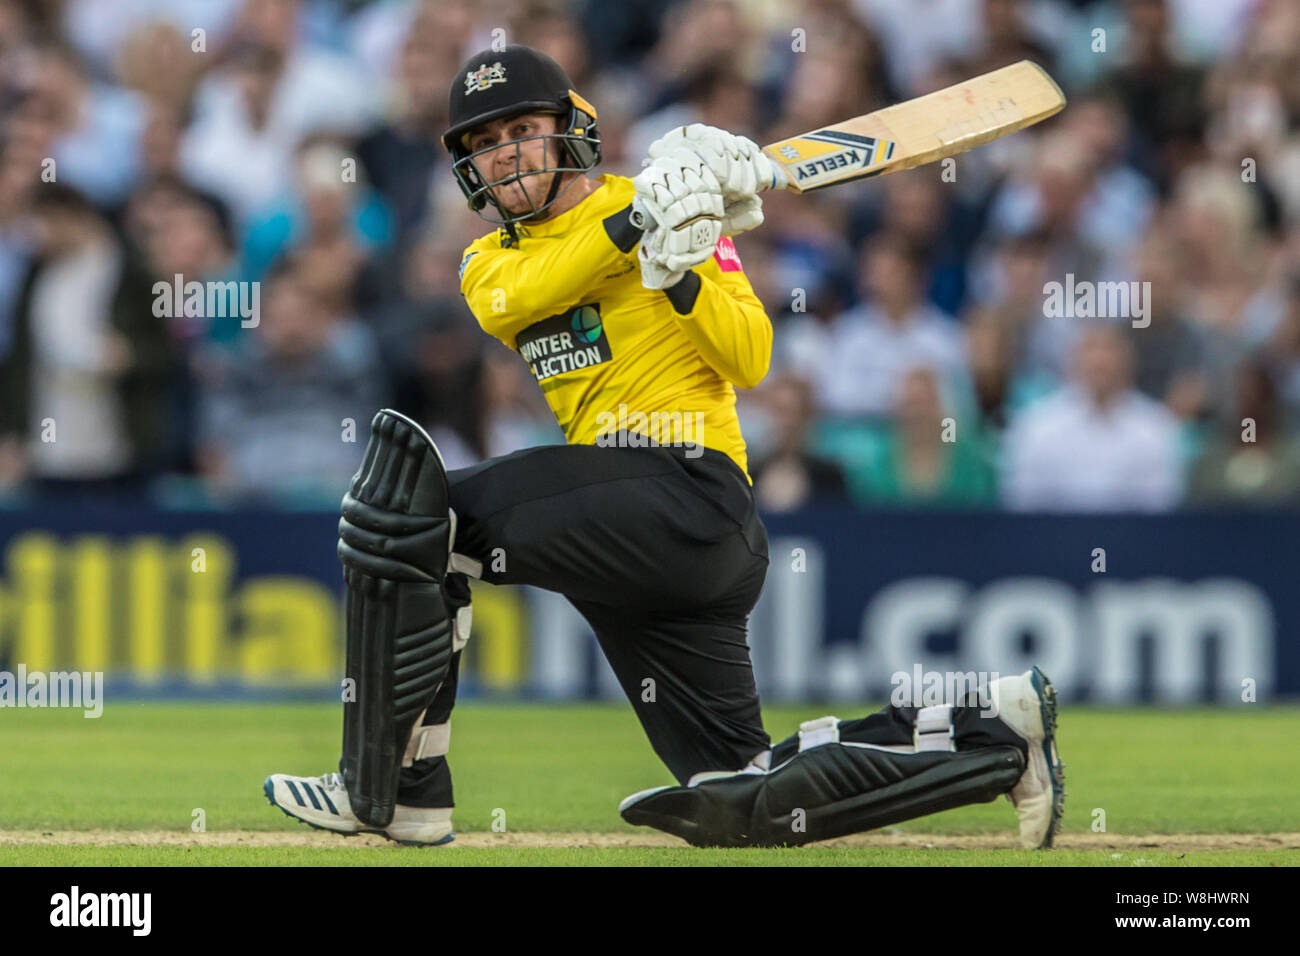 London, UK. 9 August, 2019. Ryan Higgins batting for Gloucestershire against Surrey in the Vitality T20 Blast match at the Kia Oval. David Rowe/Alamy Live News Stock Photo